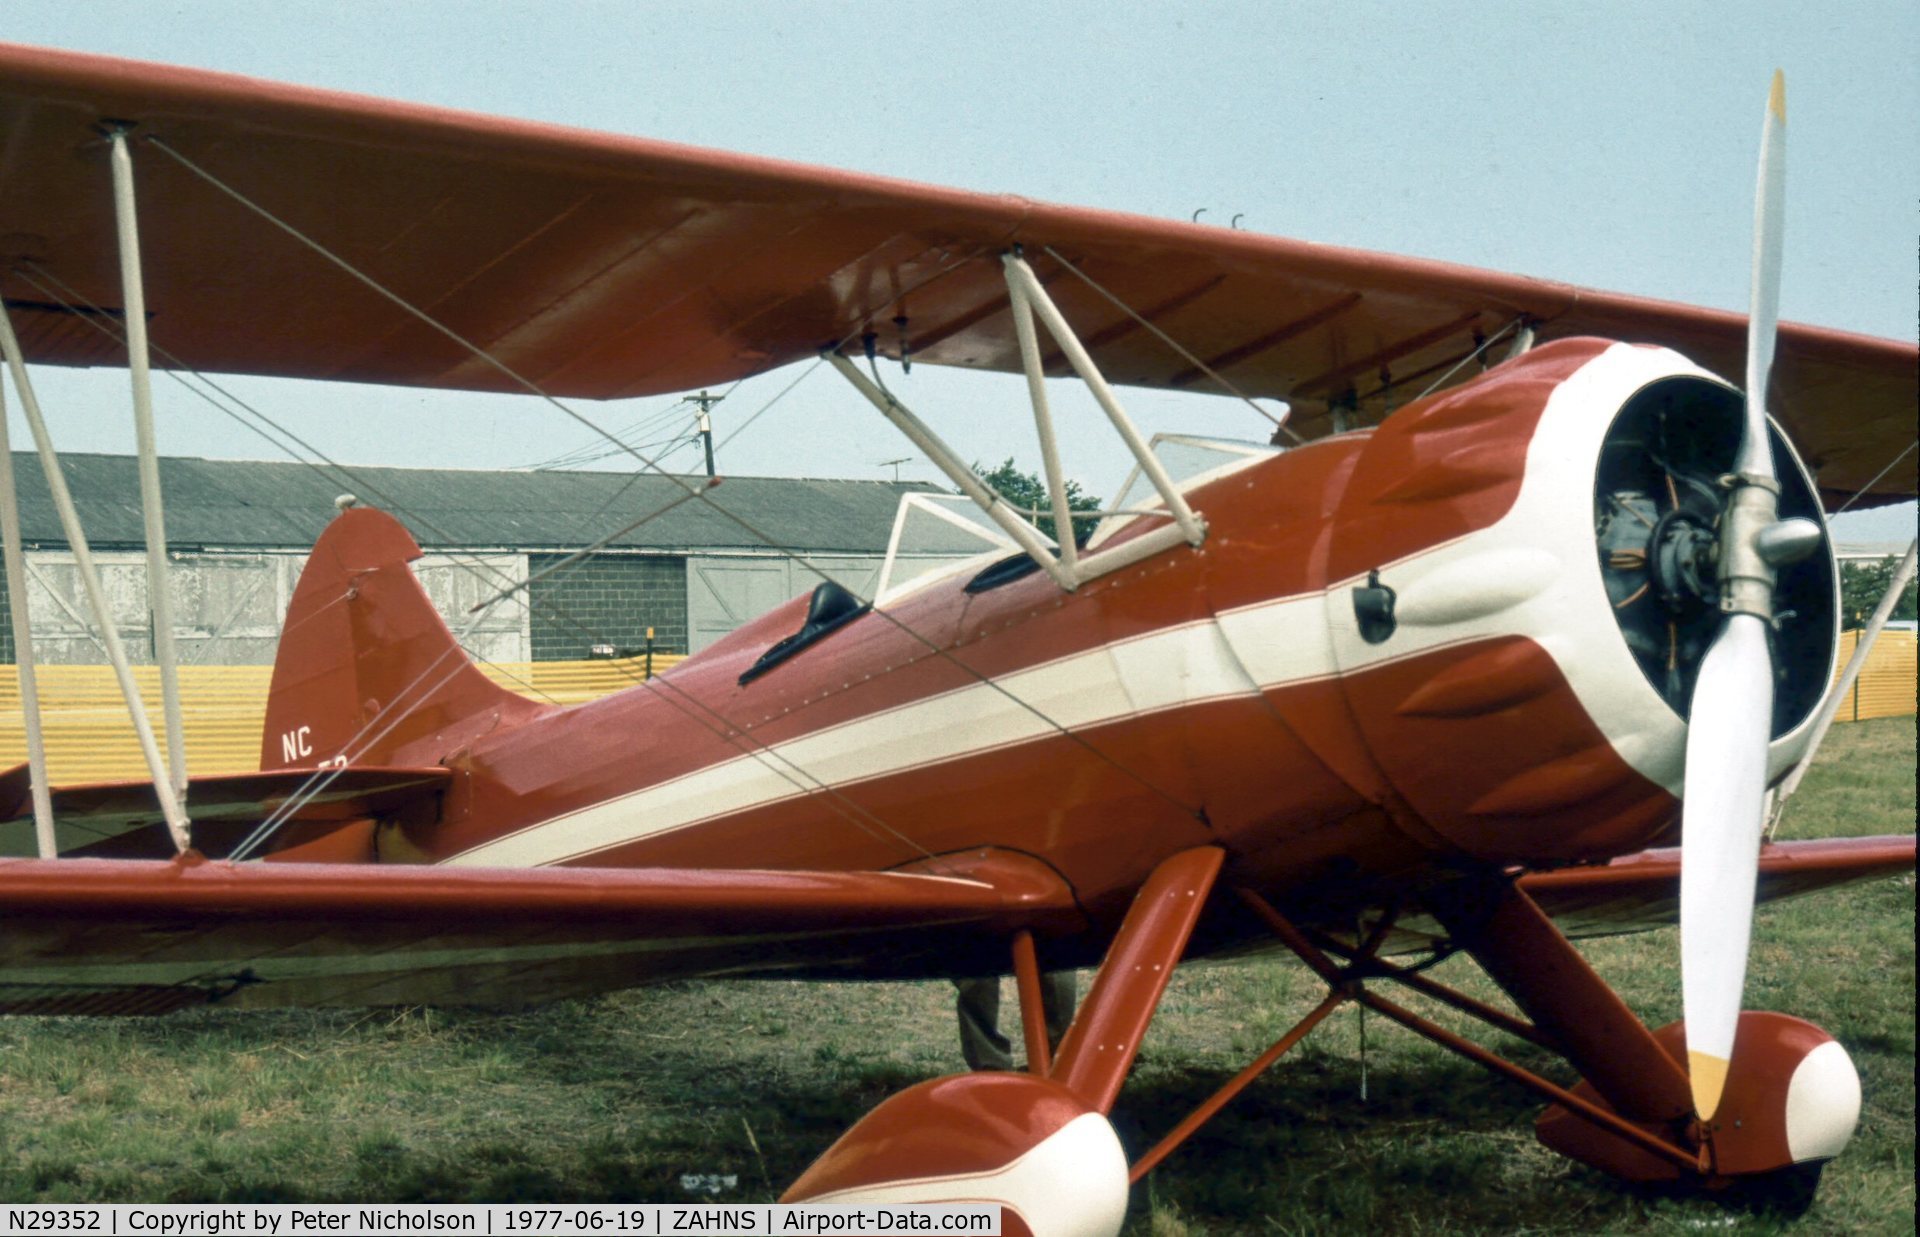 N29352, 1940 Waco UPF-7 C/N 5379, Waco UPF-7 at the EAA Fly-in at Zahns Airport, Amityville, Long Island in the Summer of 1977. The airport closed in 1980.